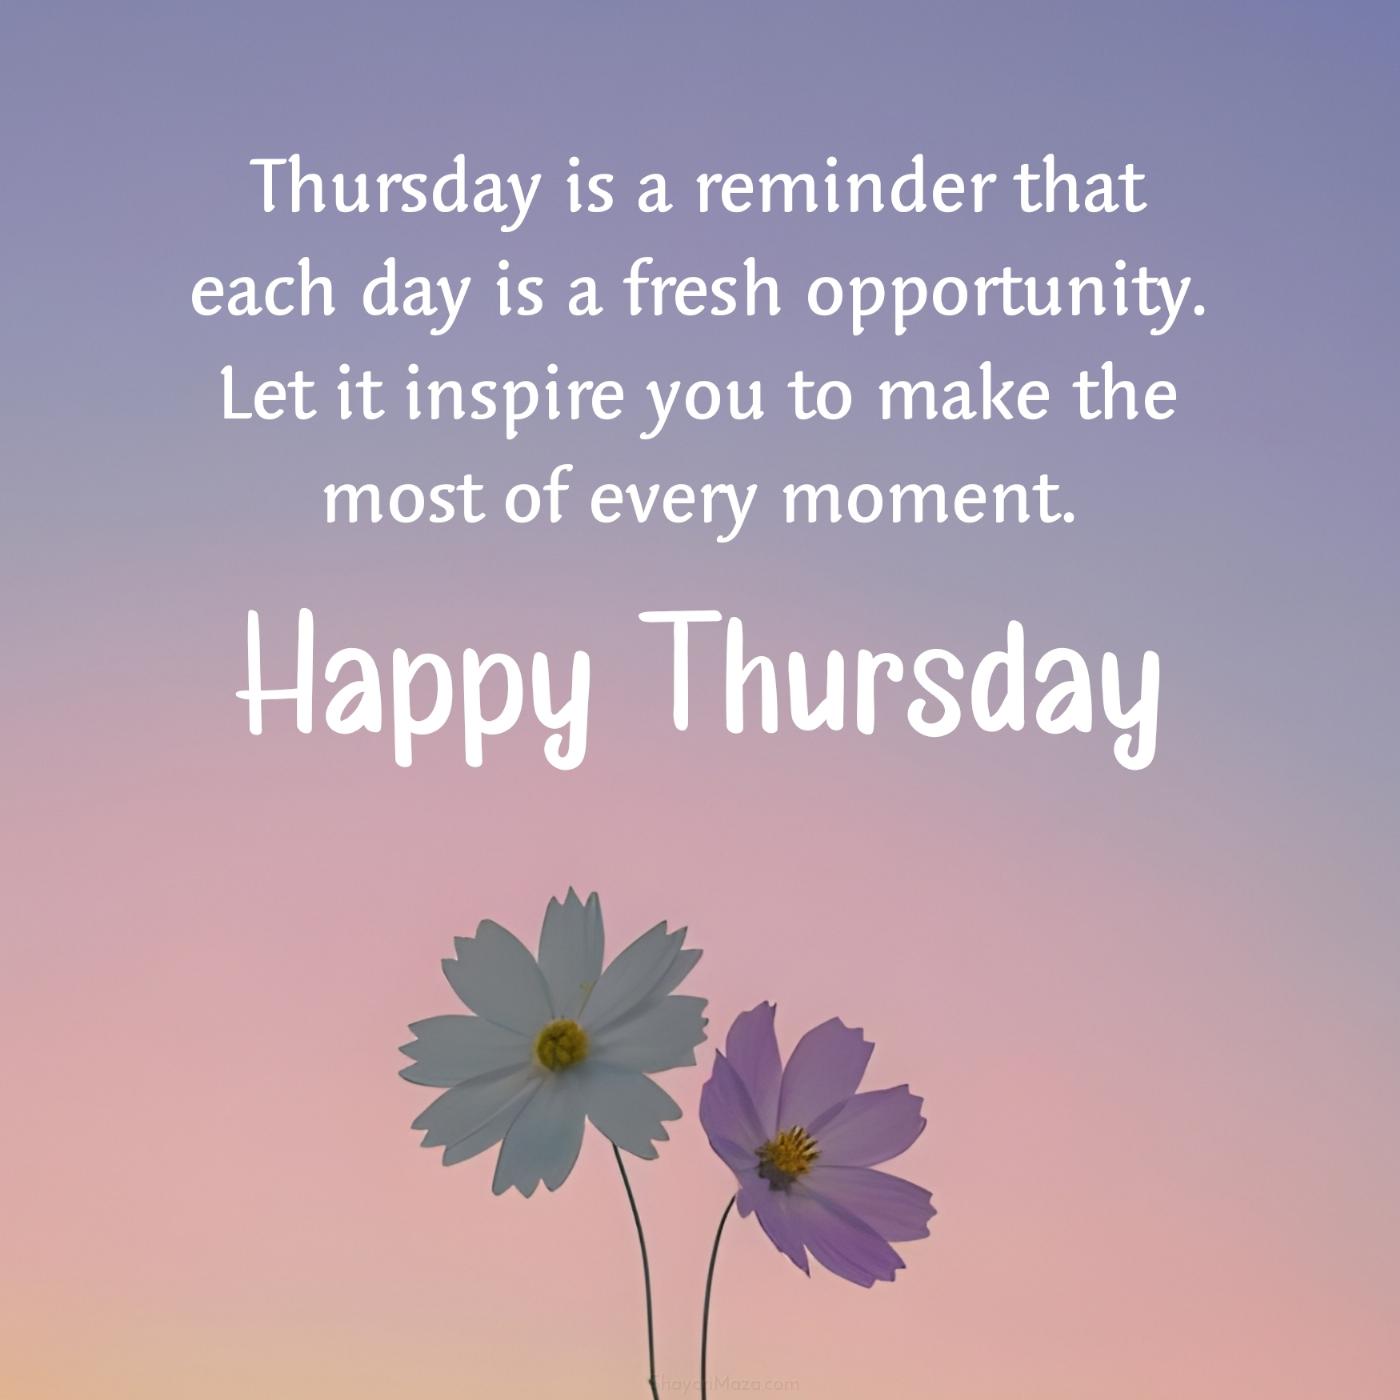 Thursday is a reminder that each day is a fresh opportunity